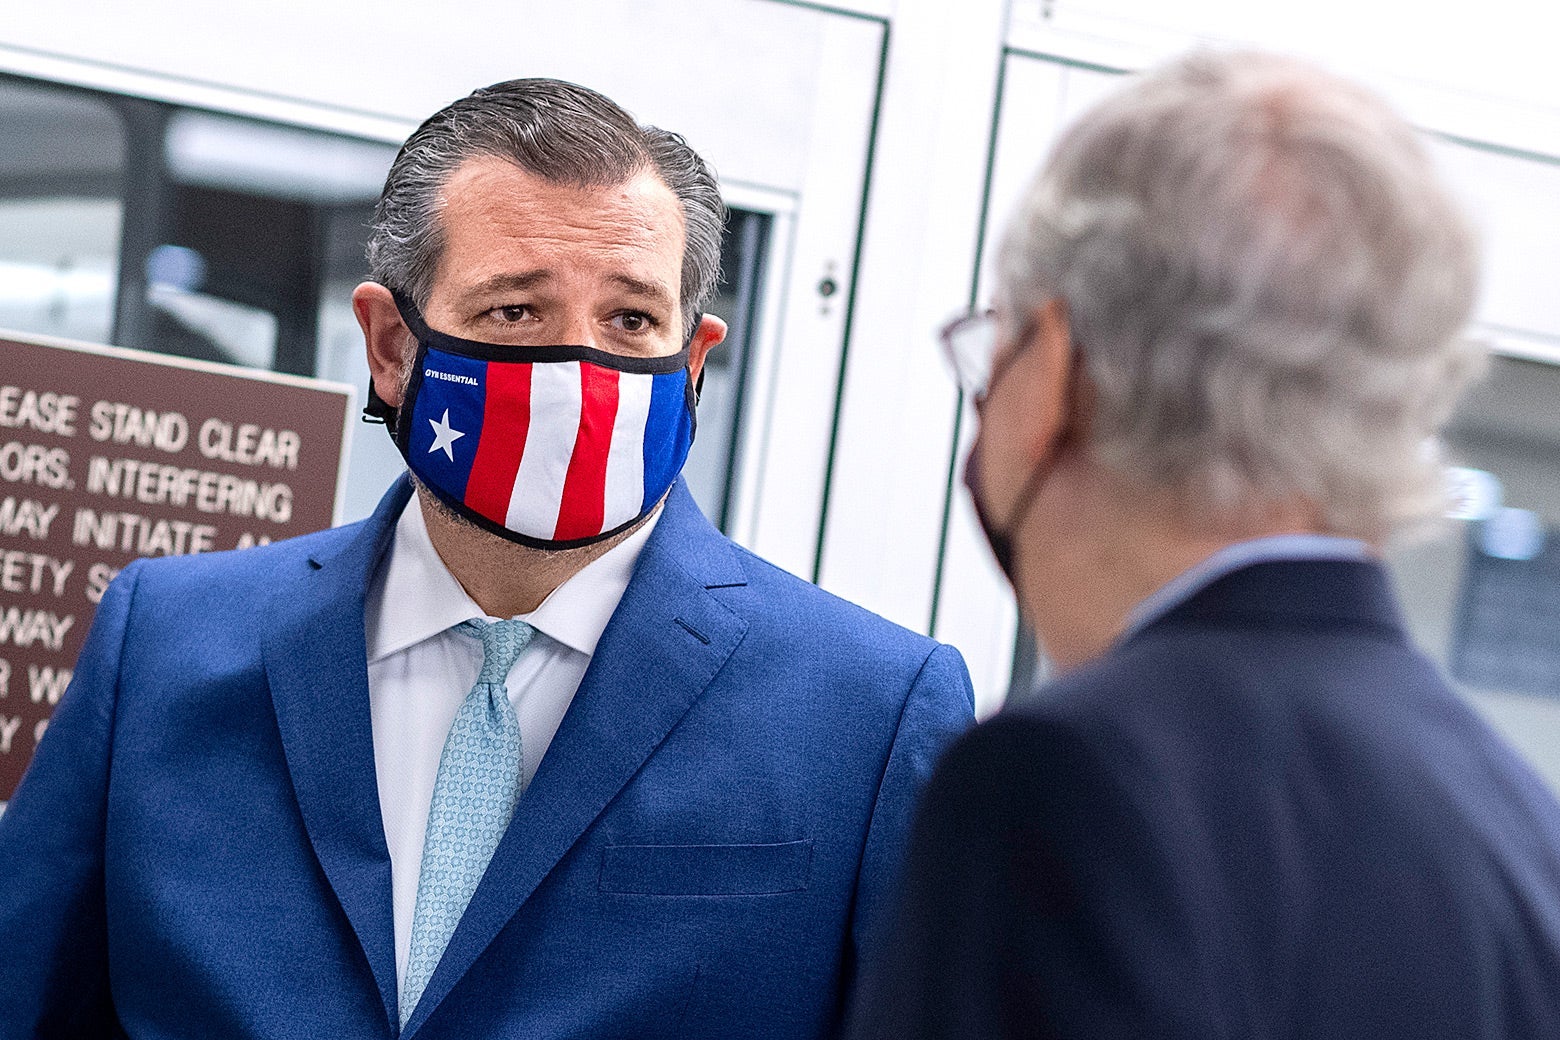 Ted Cruz, wearing a mask, chats with Mitch McConnell